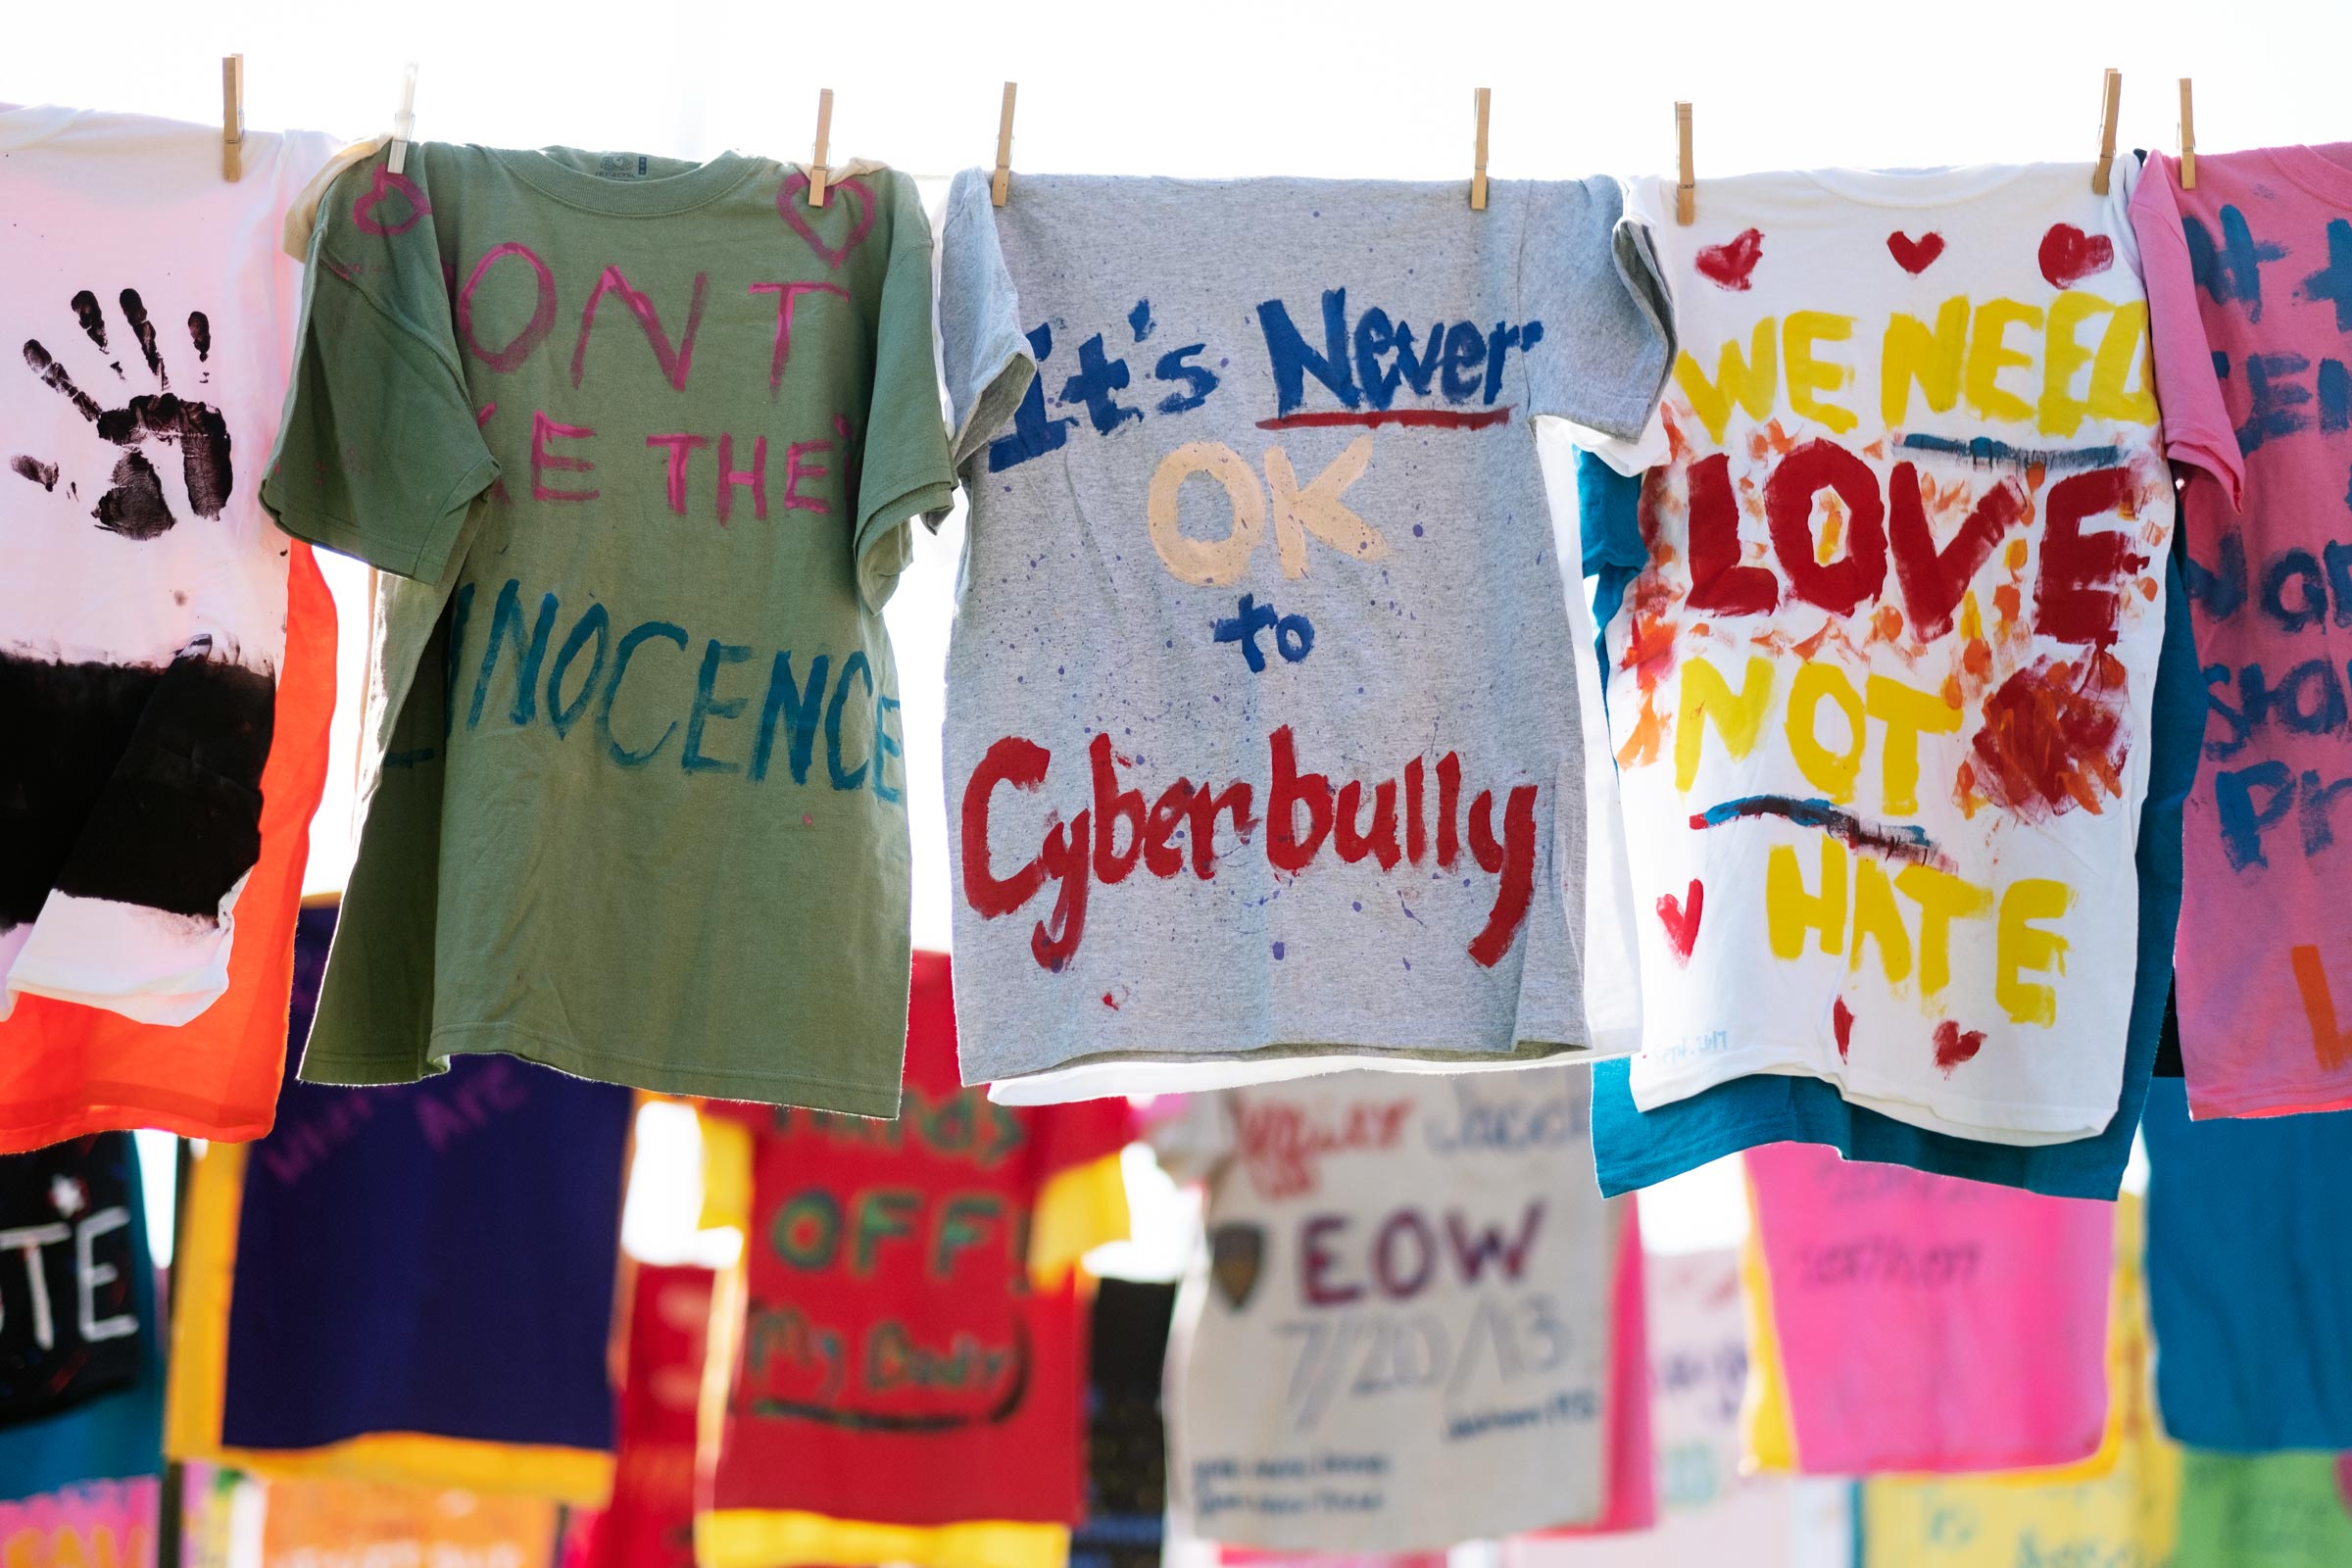 A colorful array of painted t-shirts hang by clothespins as part of the Clothesline Project.